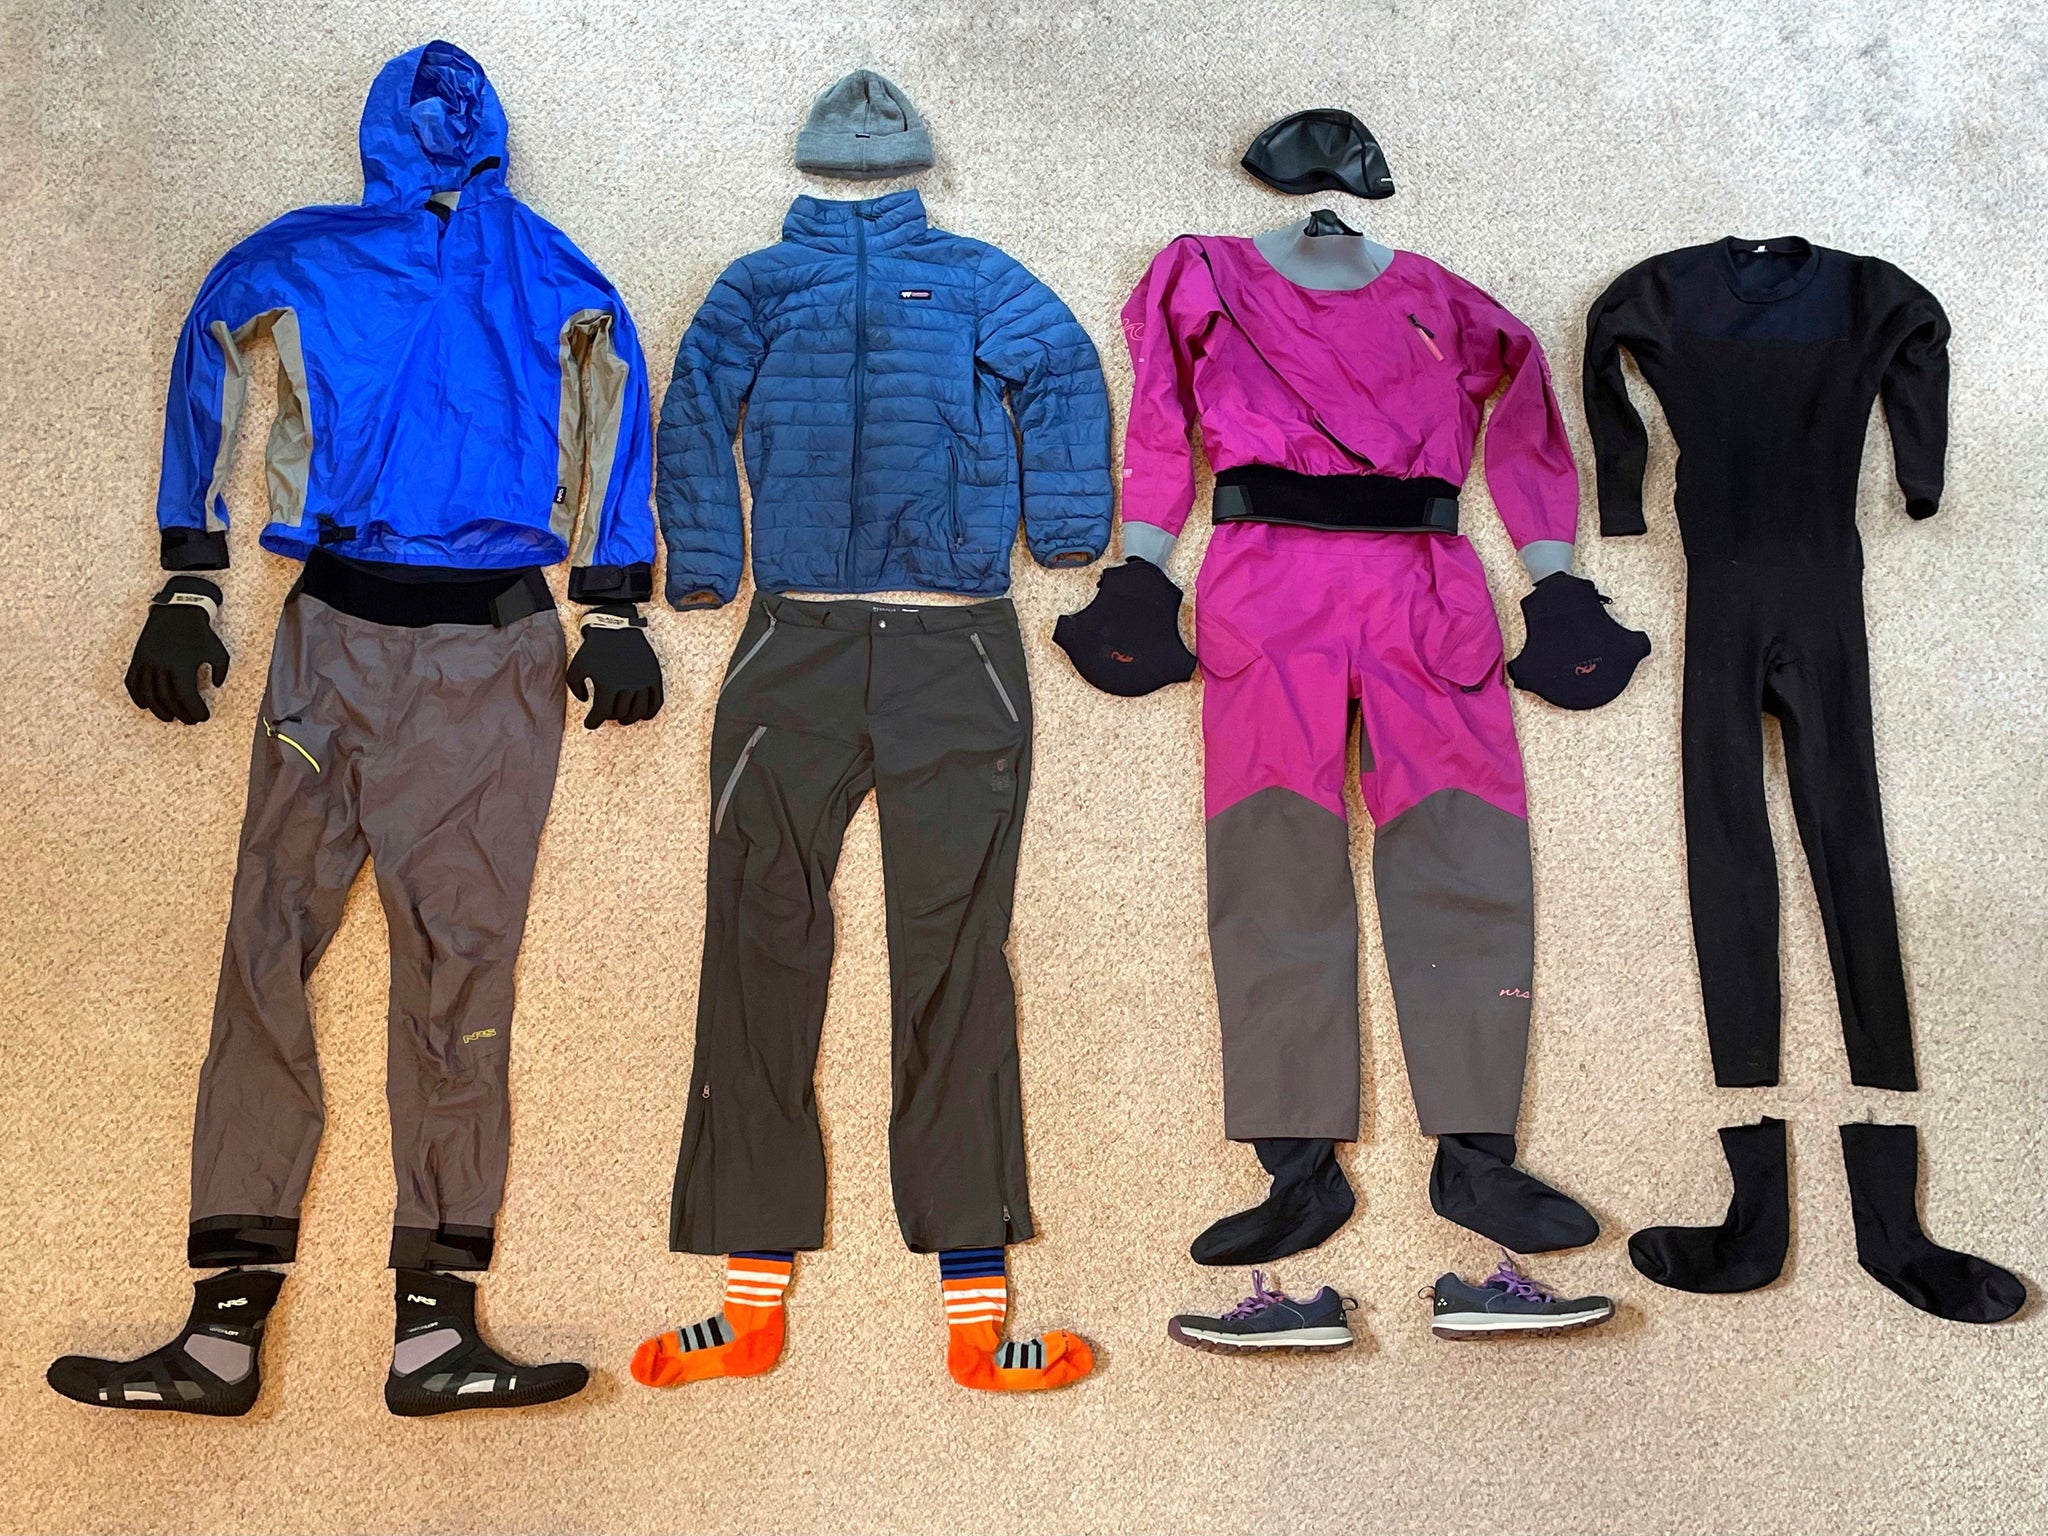 Packrafting paddle outfits, layers and drysuits. packraft pogies and gloves